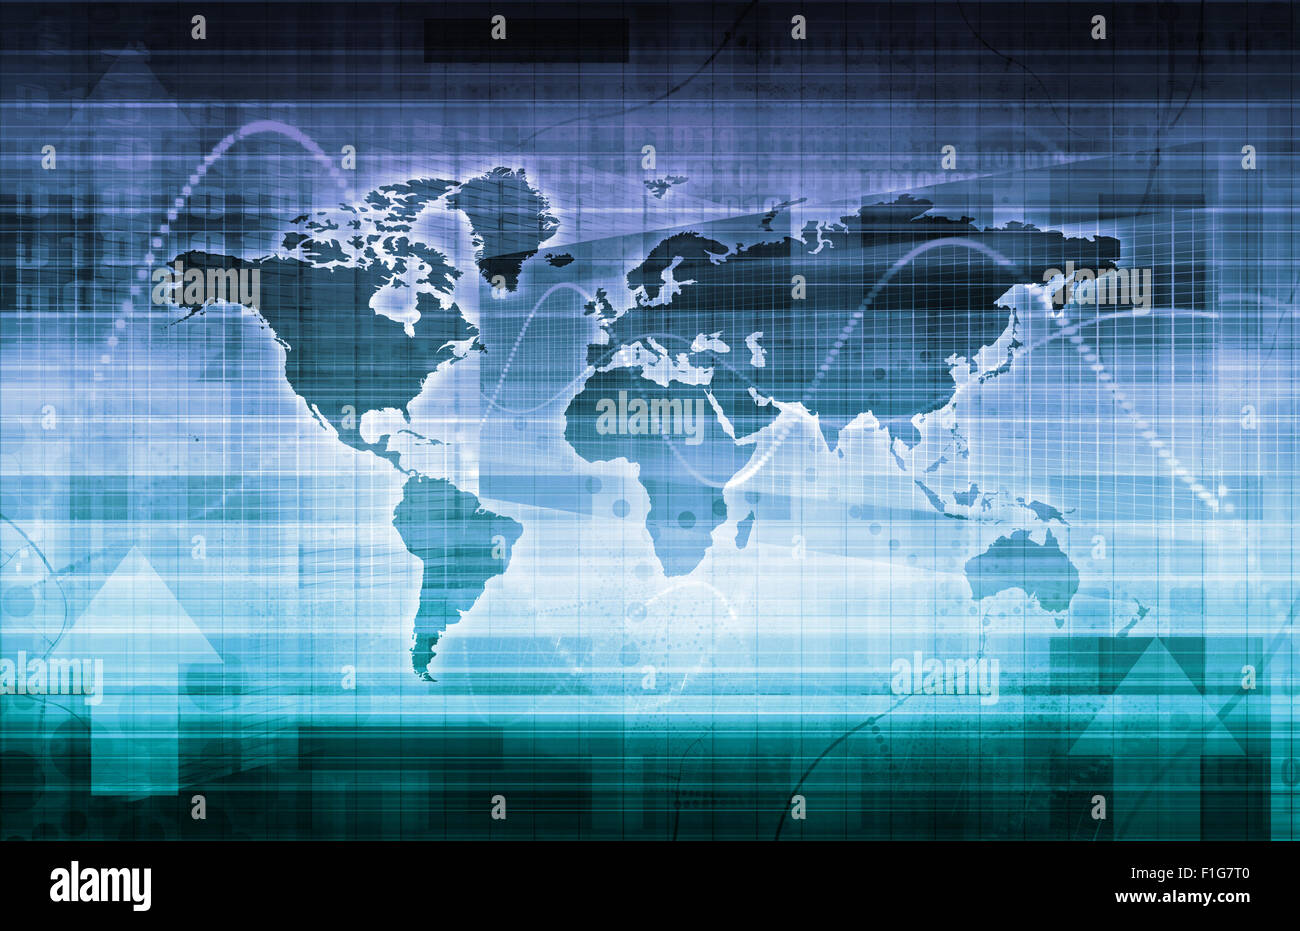 Global Technology Solutions on the Internet Concept Art Stock Photo